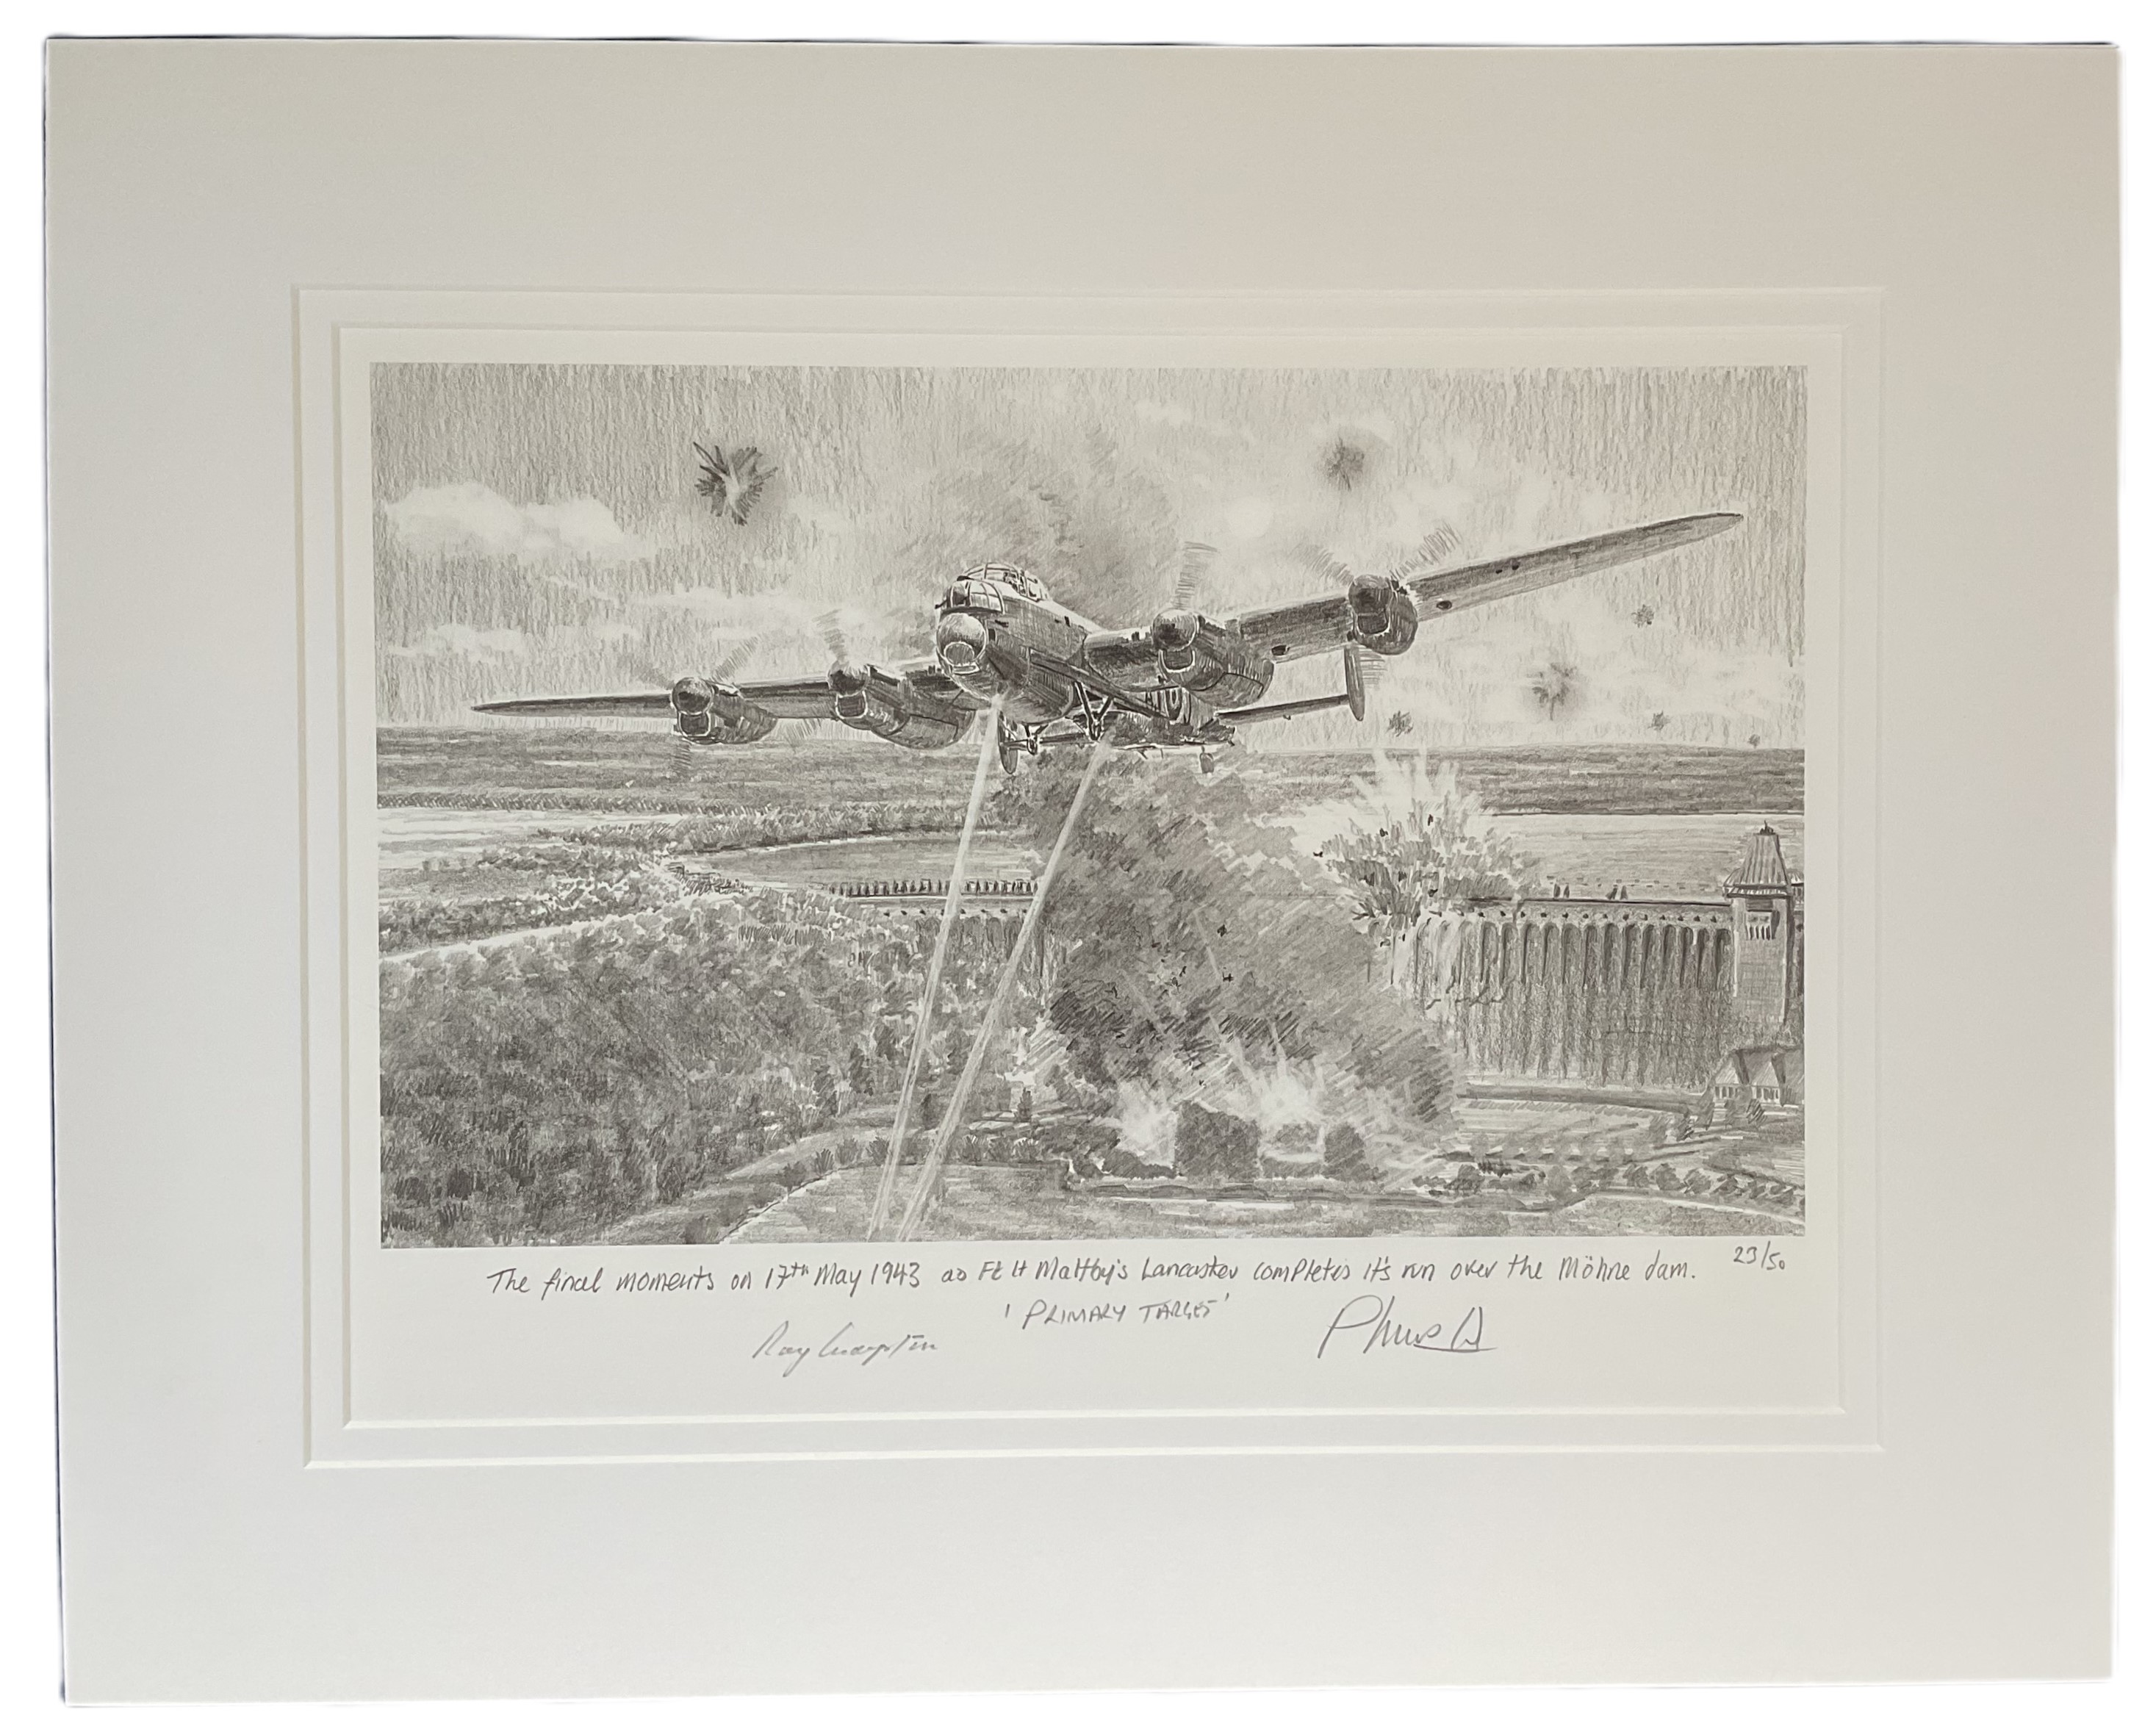 WW2 Dambuster print Primary Target by Phillip West, signed by him and Raid veteran Ray Grayston.